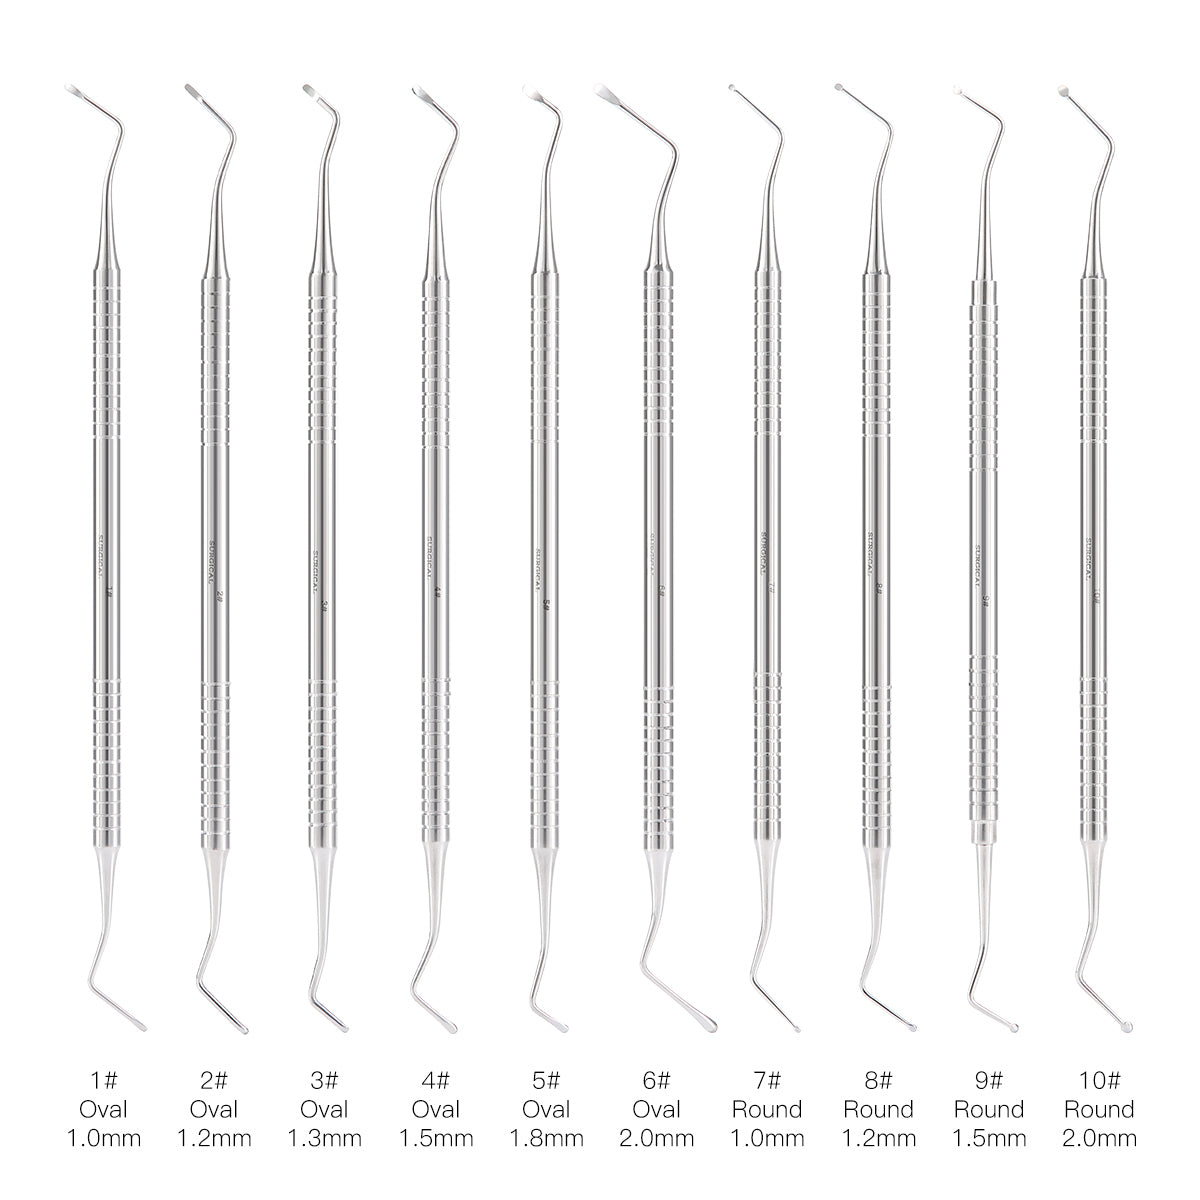 Dental Endo Spoon Excavators Stainless Steel Double Ended Instruments 1pc/Pack - azdentall.com